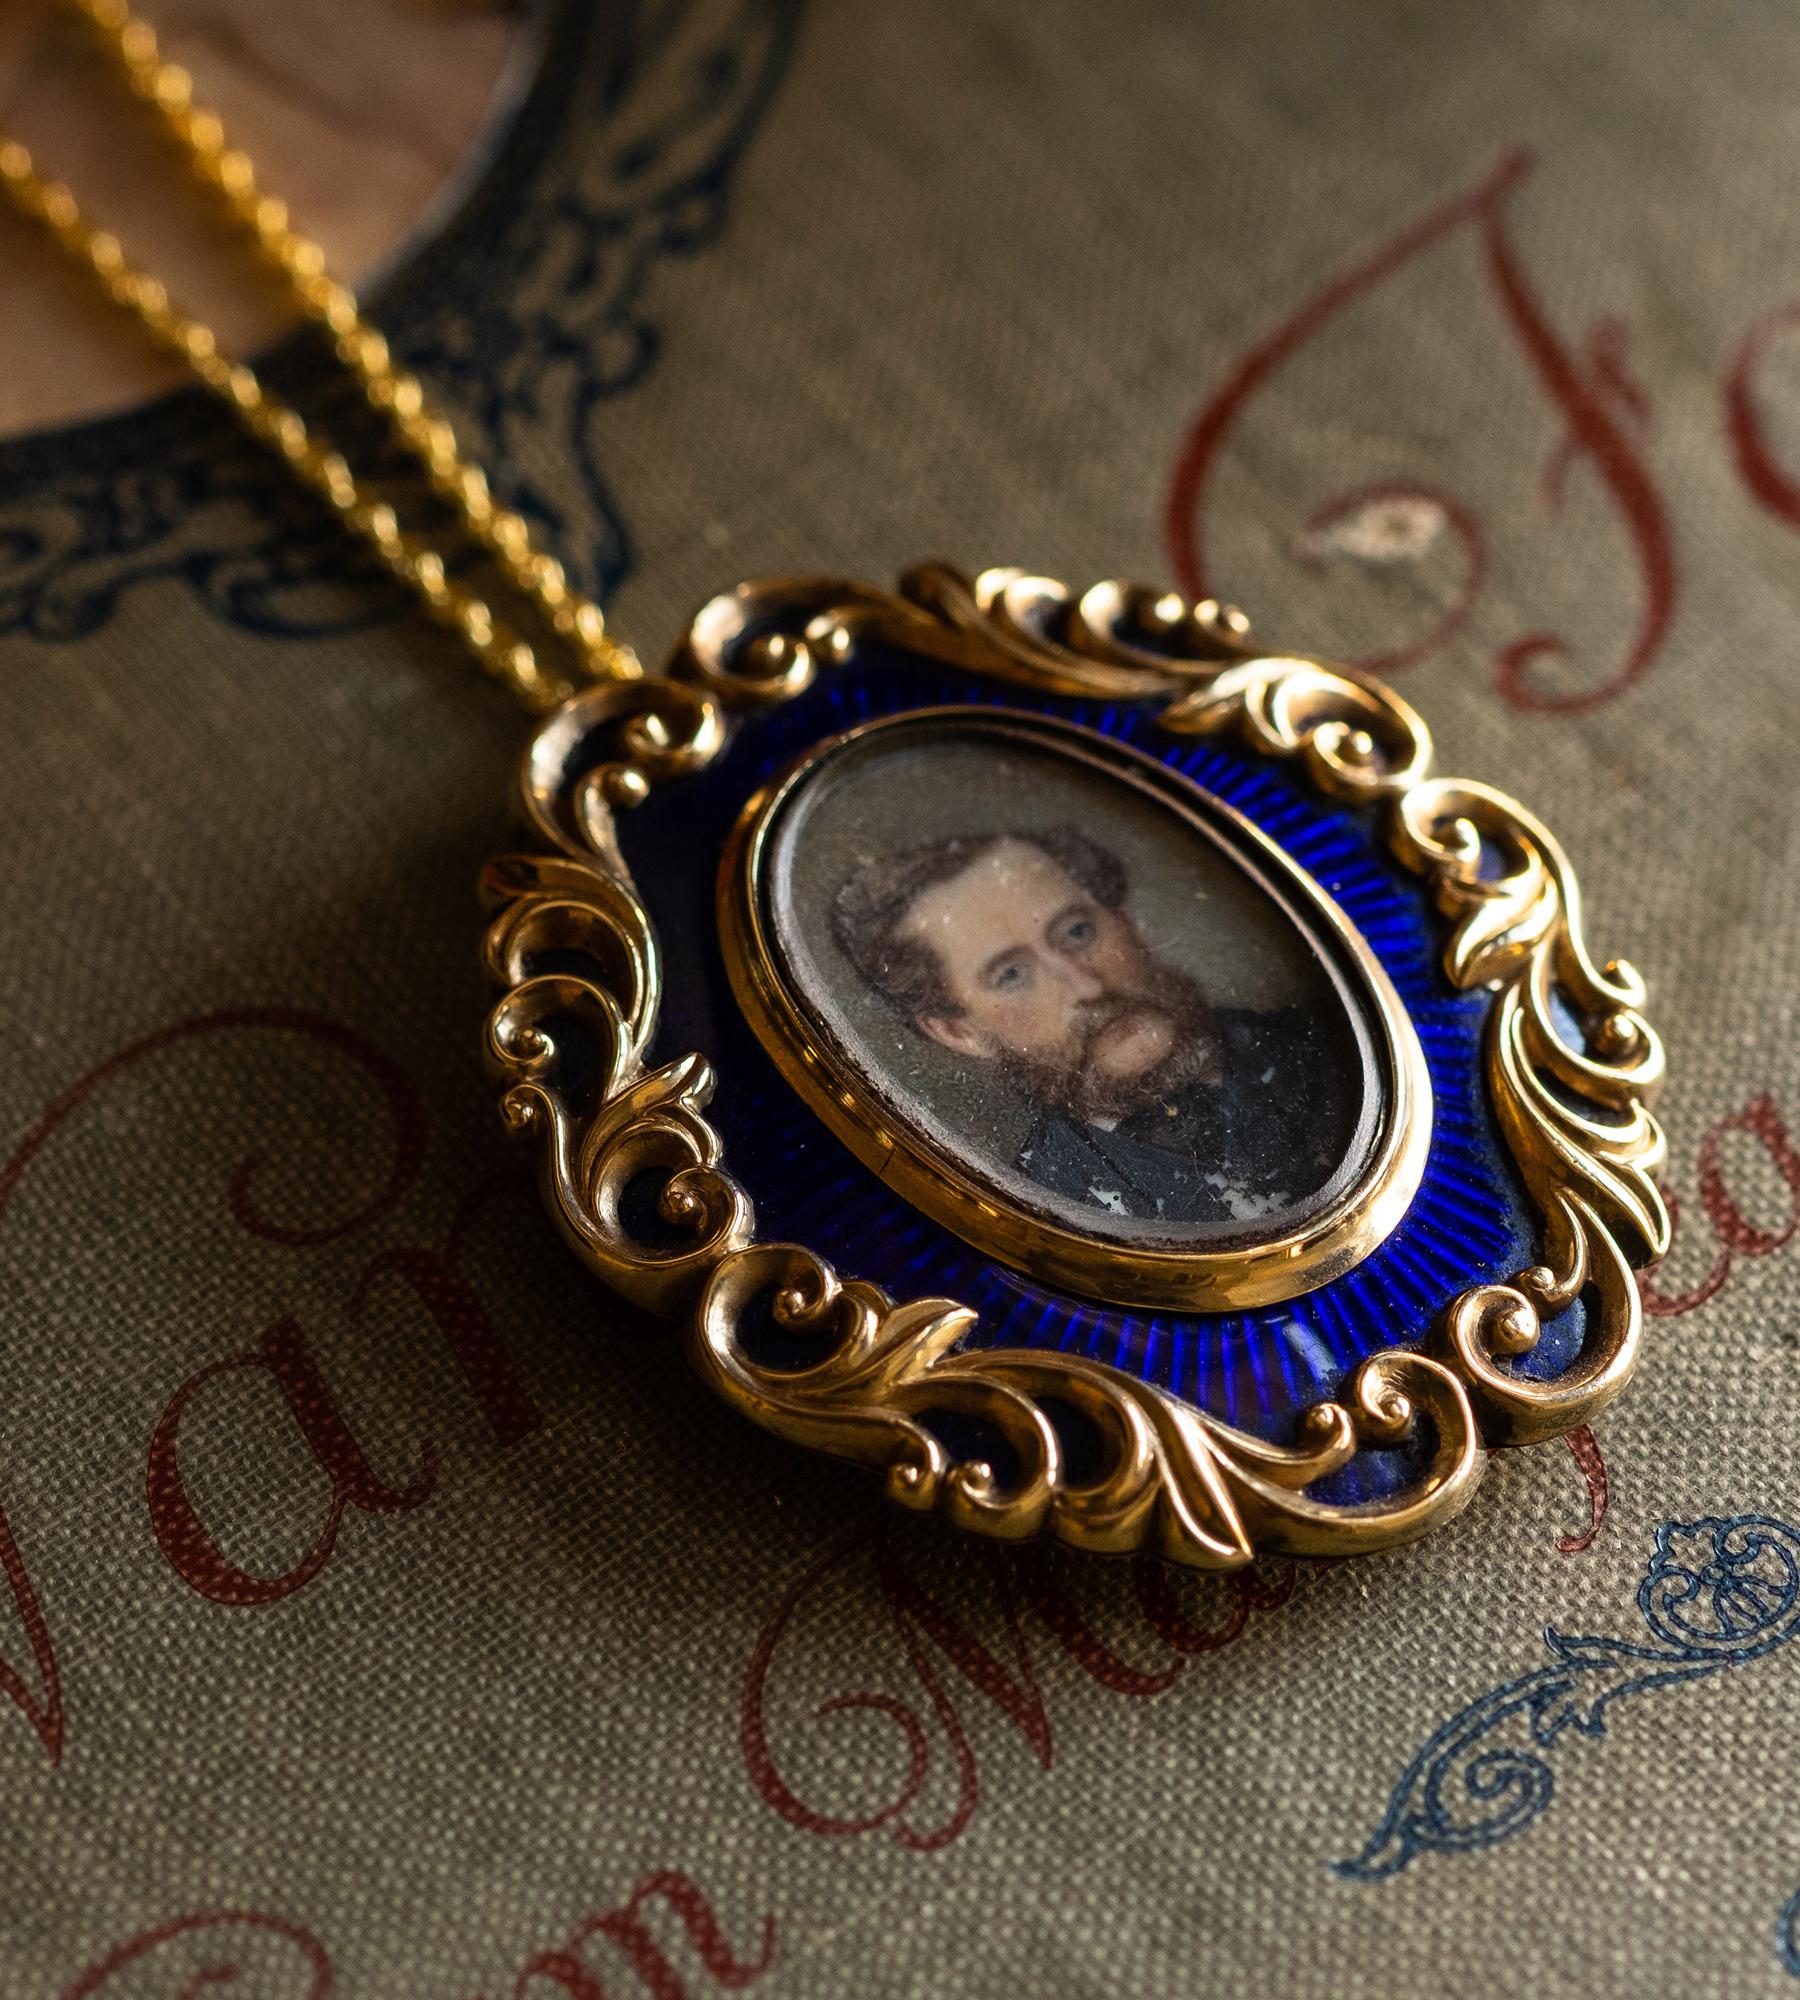 Original, extraordinary and a tiny work of art, we are endlessly drawn to the history of miniature portraits in jewellery. Characters from the past come to life through these fascinating pieces. 
This captivating and handsome Victorian gentleman is